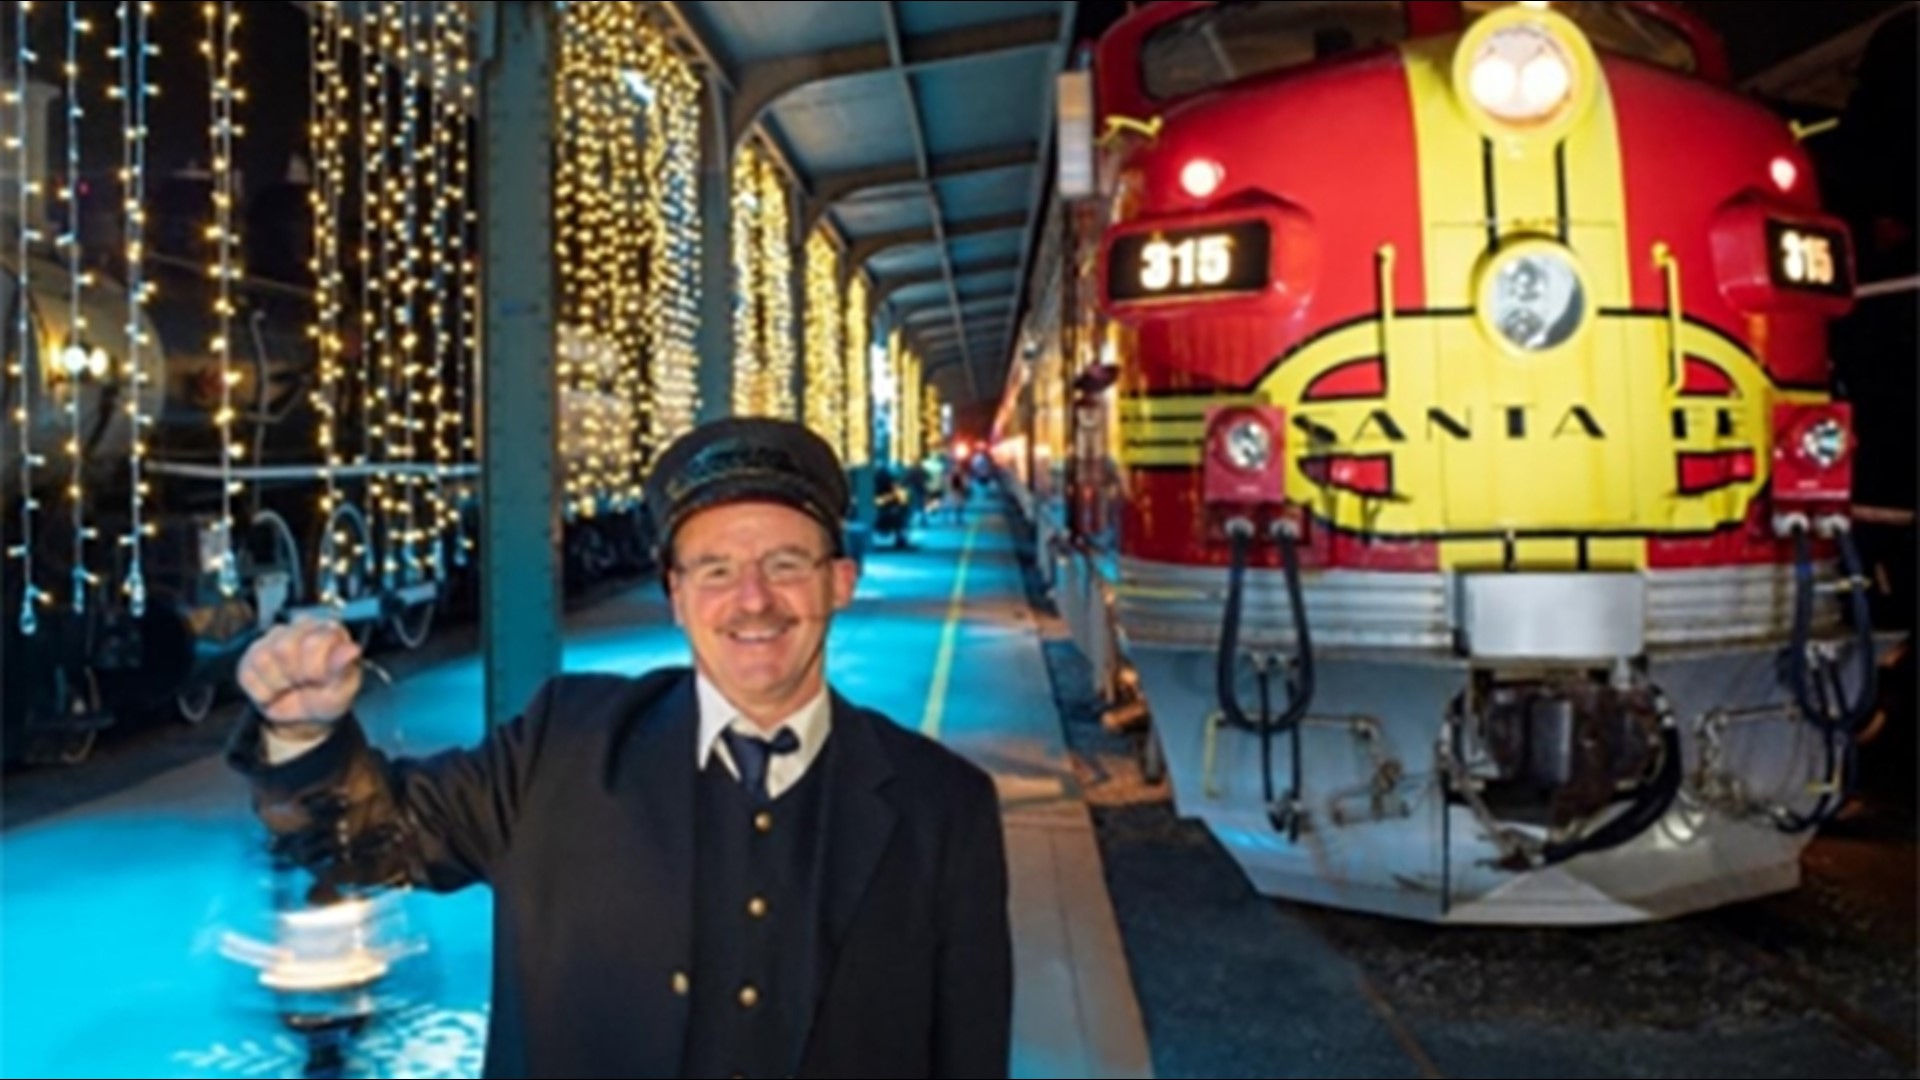 Polar Express adds train ride for adults only in Galveston